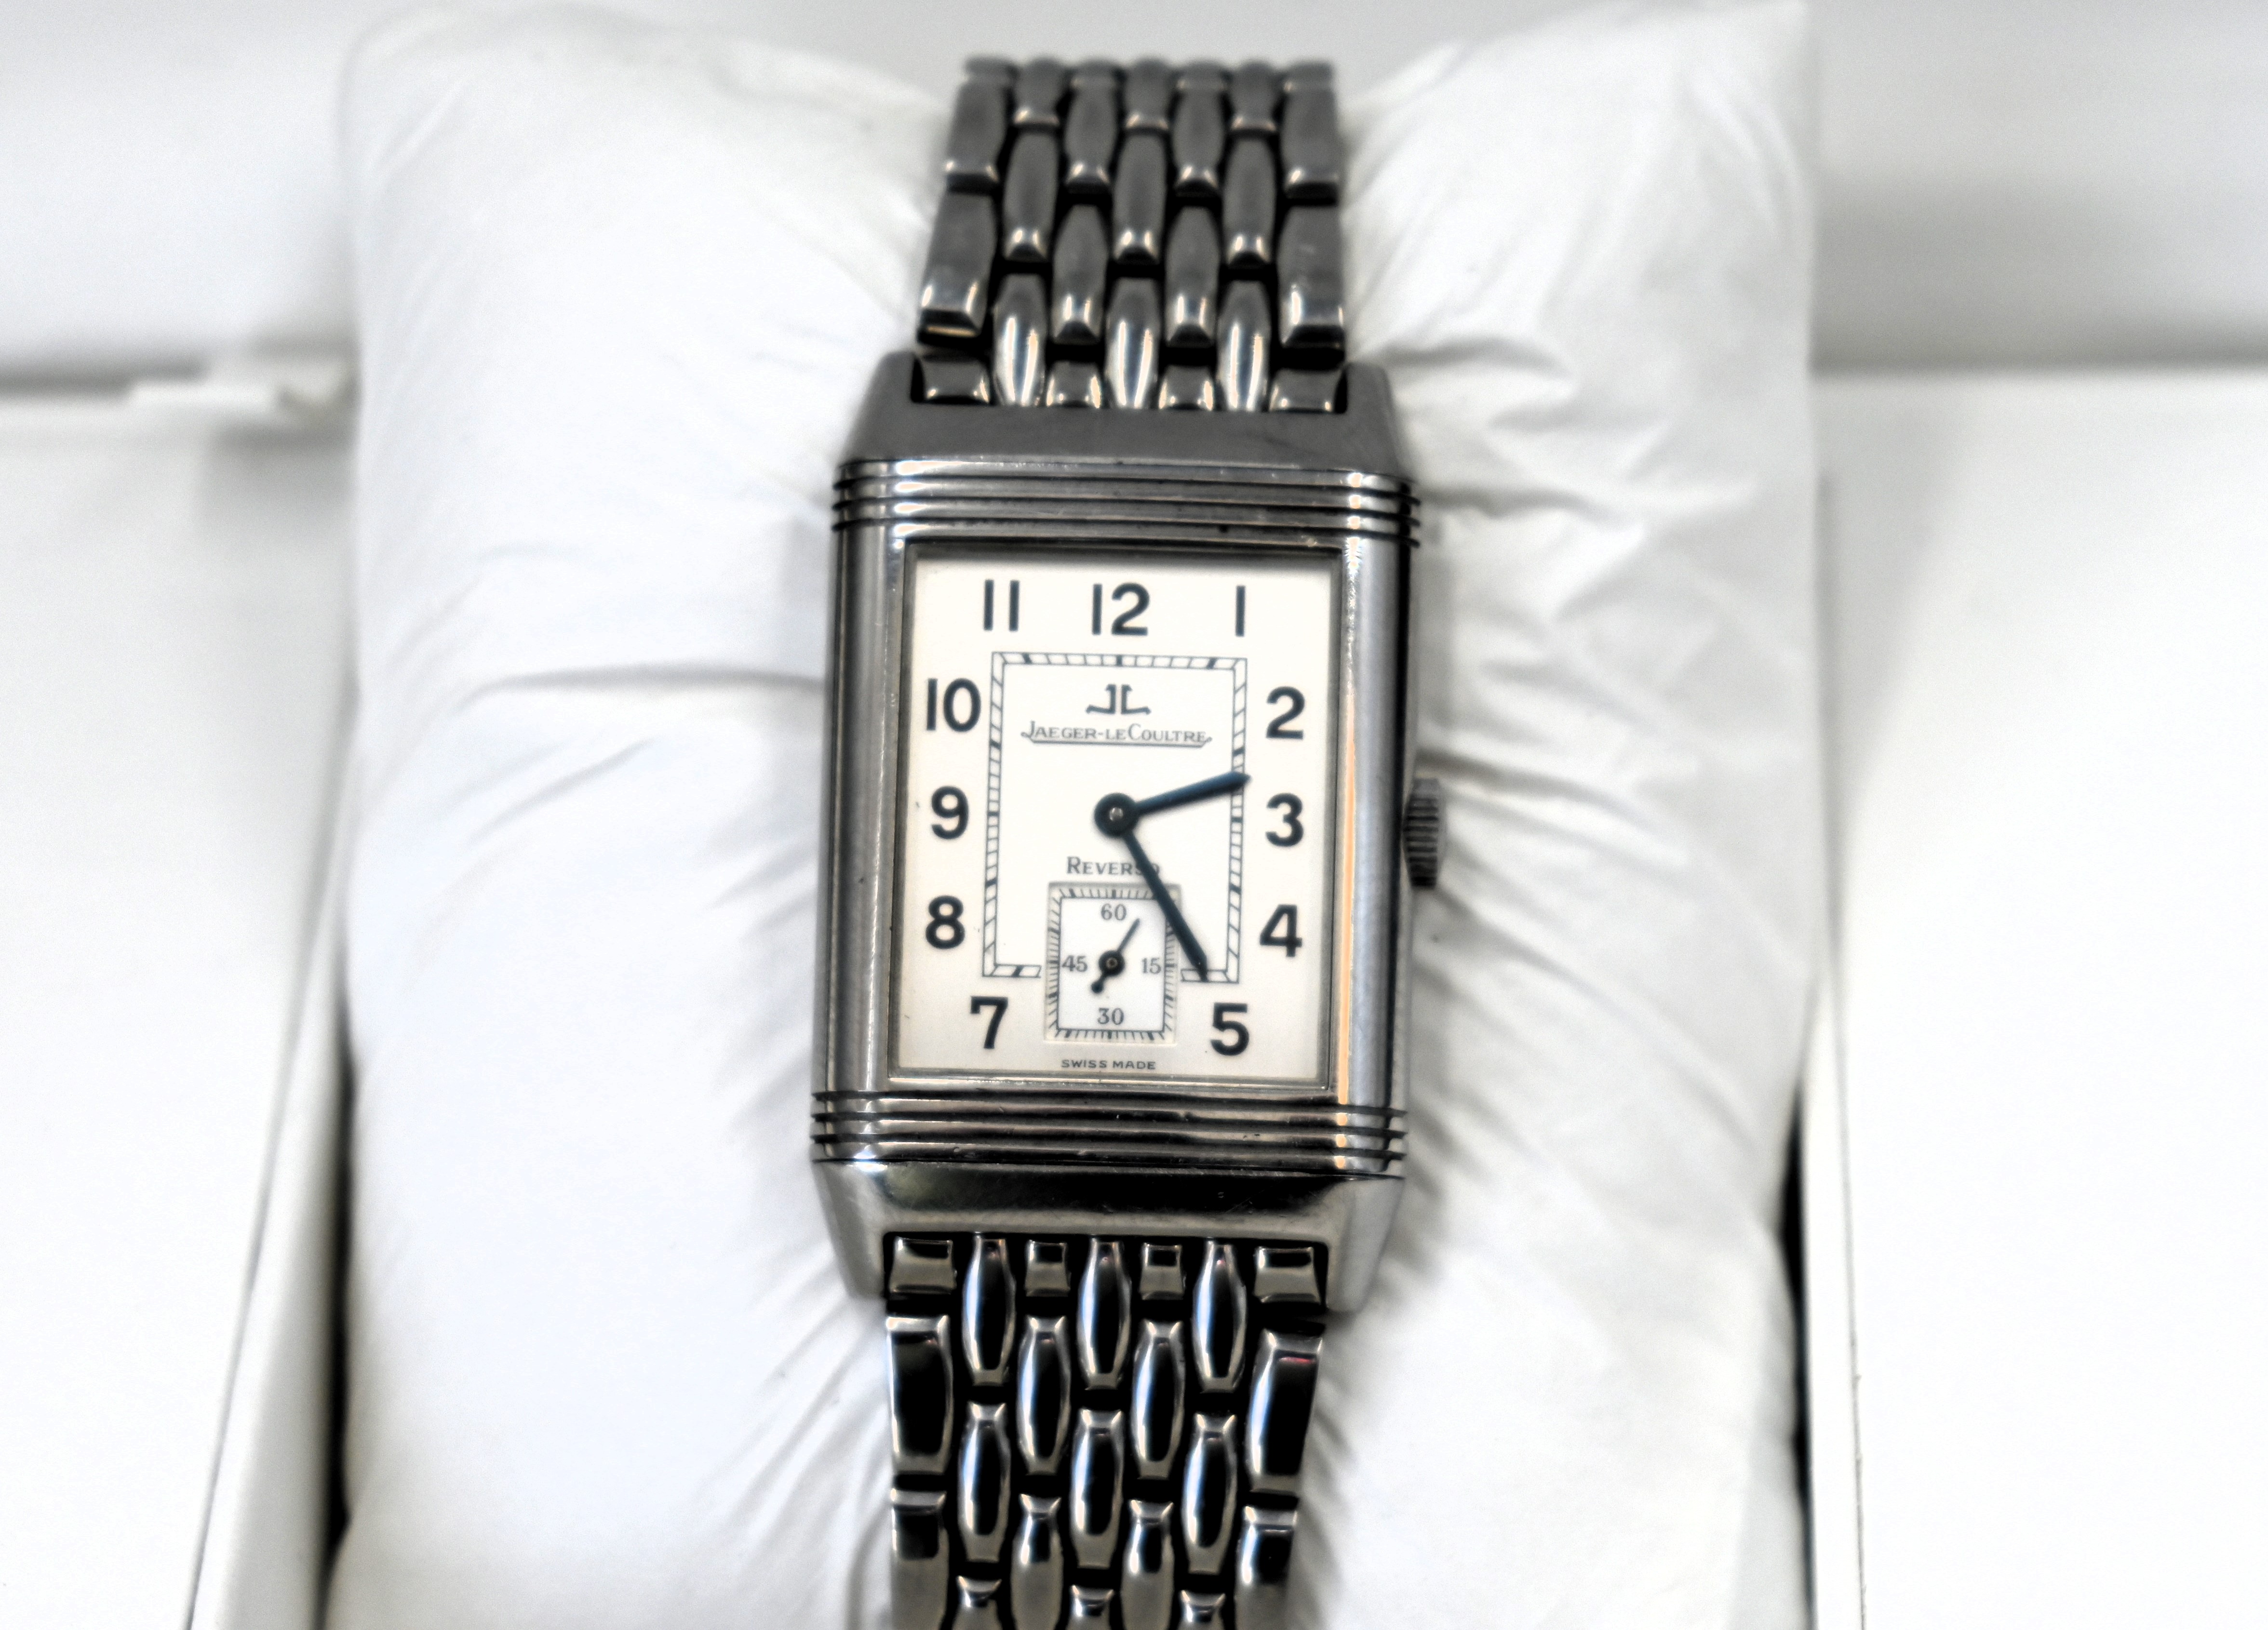 Jaeger-LeCoultre Reverso Grand Taille stainless steel gentleman's wristwatch, reference no. 270. - Image 5 of 7